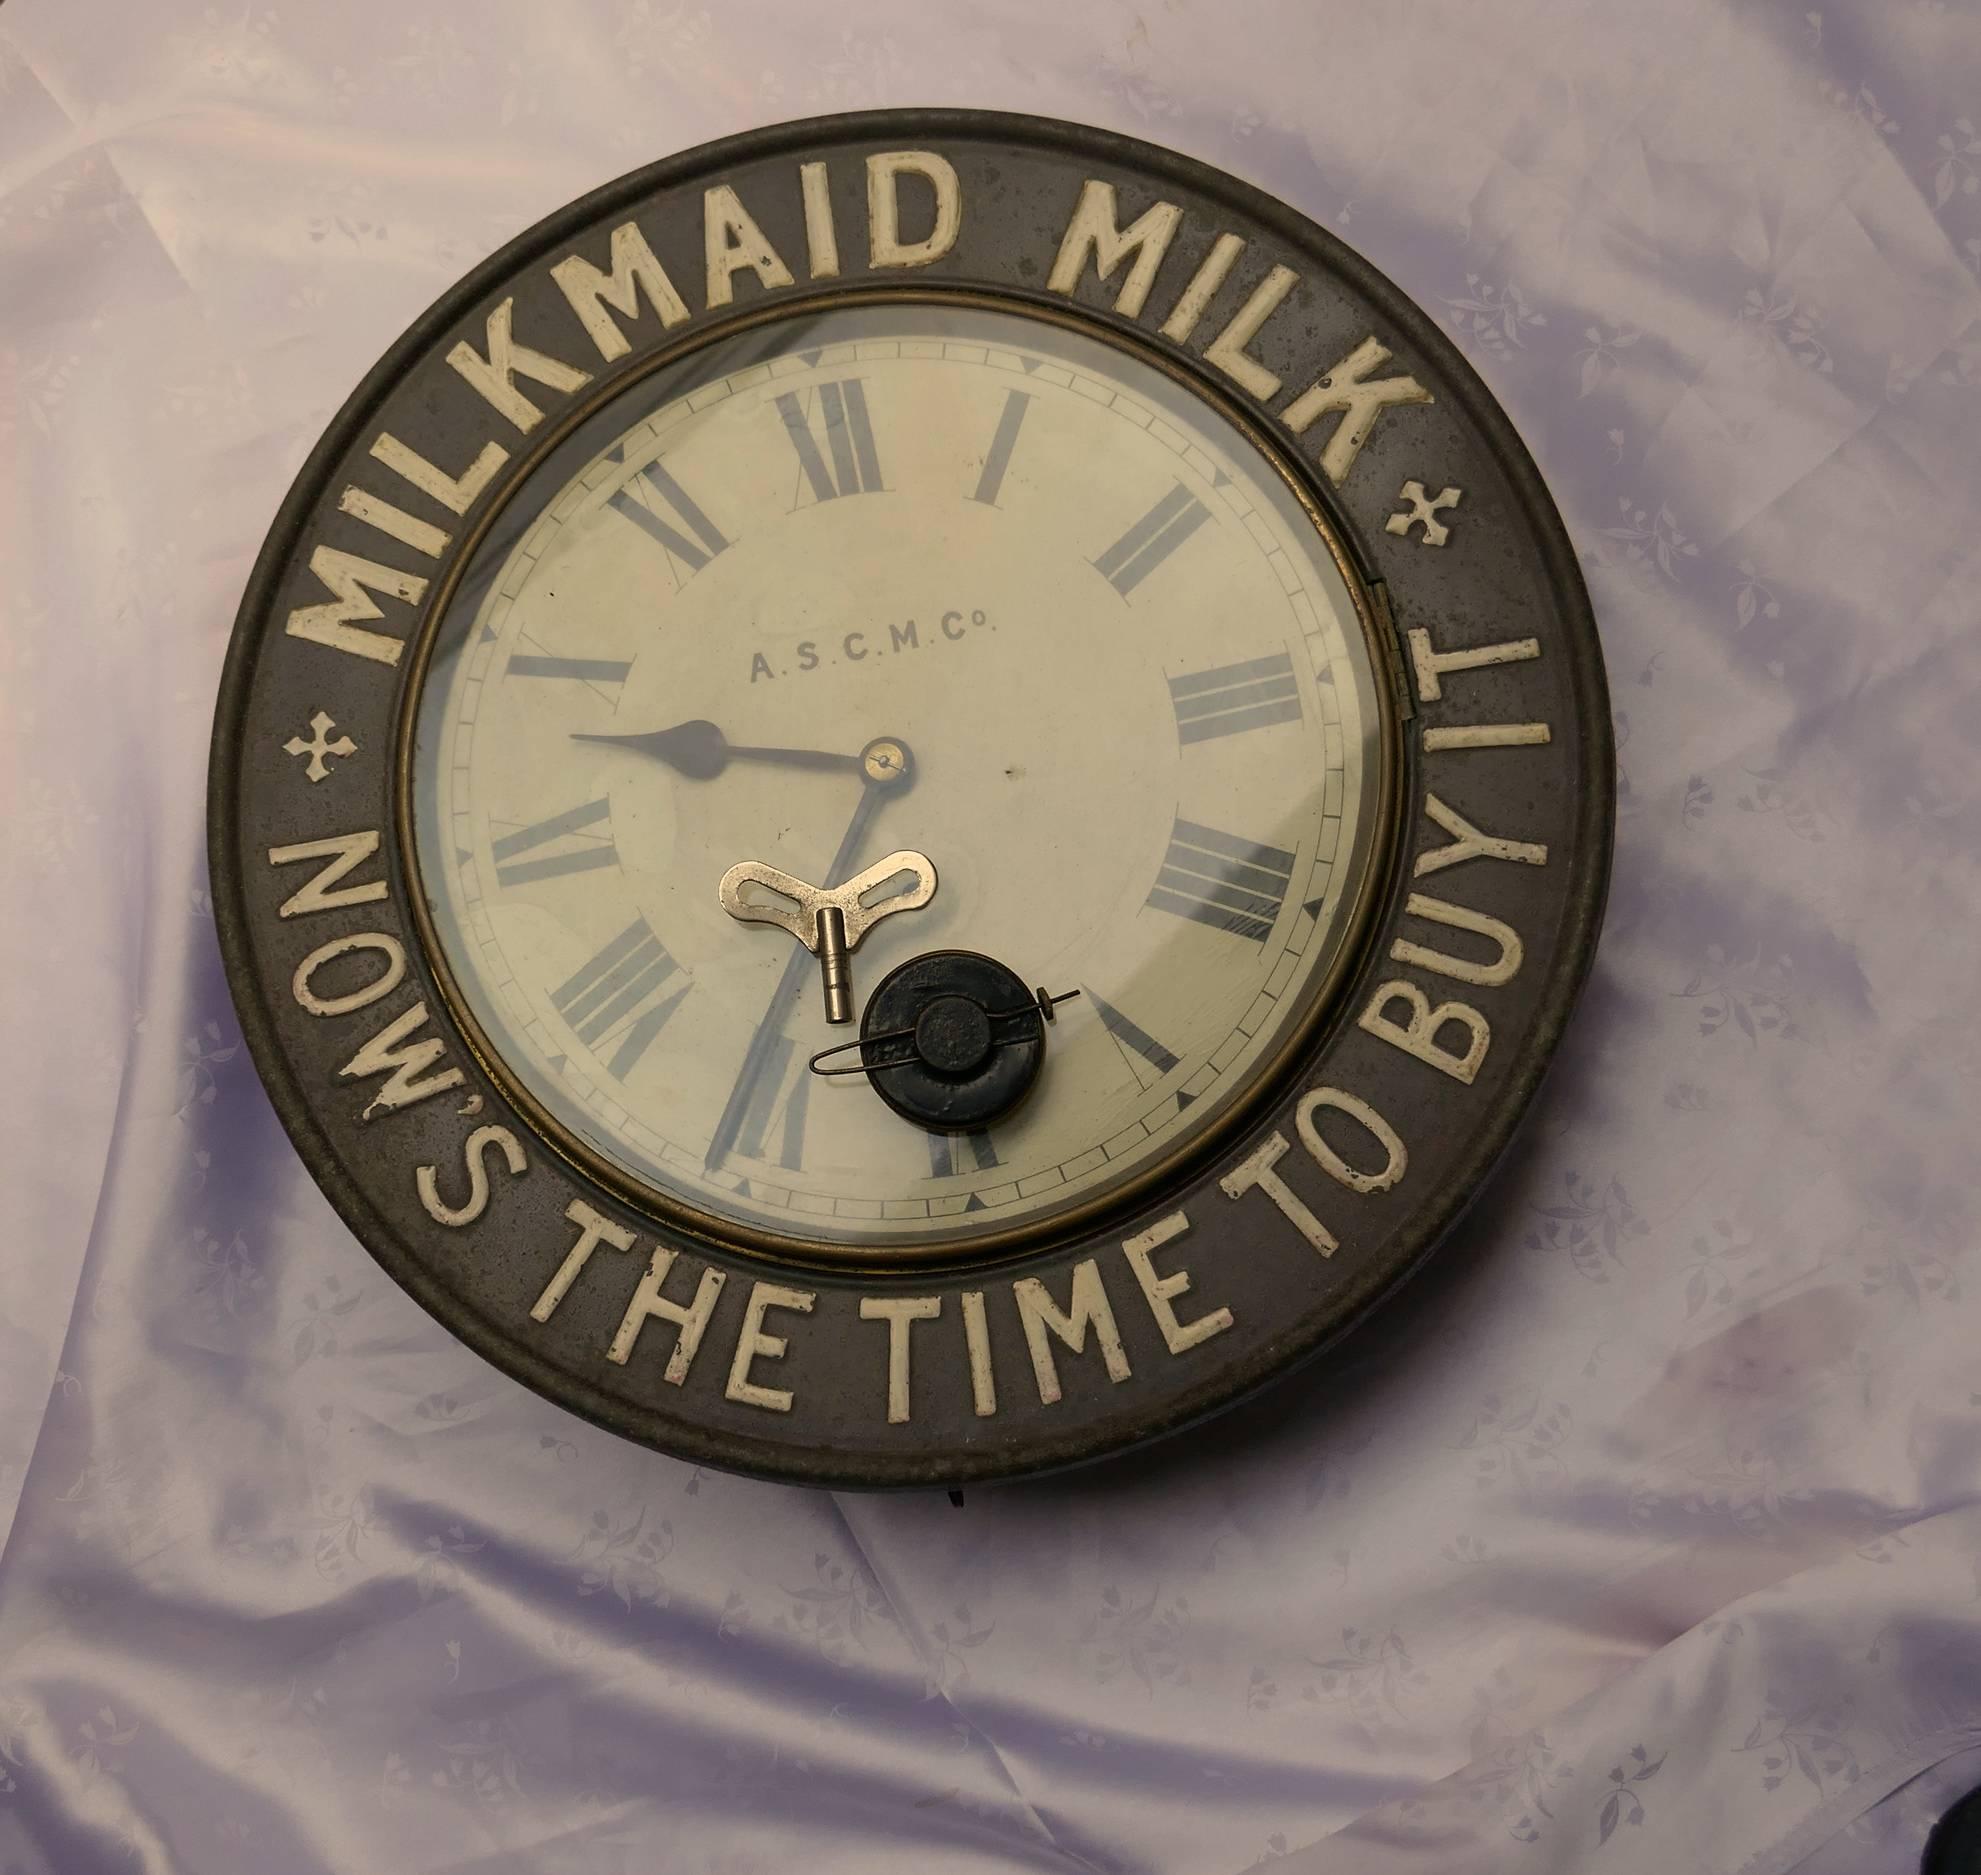 19th Century Original Mikmaid Milk Advertising Clock, from 1890 by the A.S.C.M Co